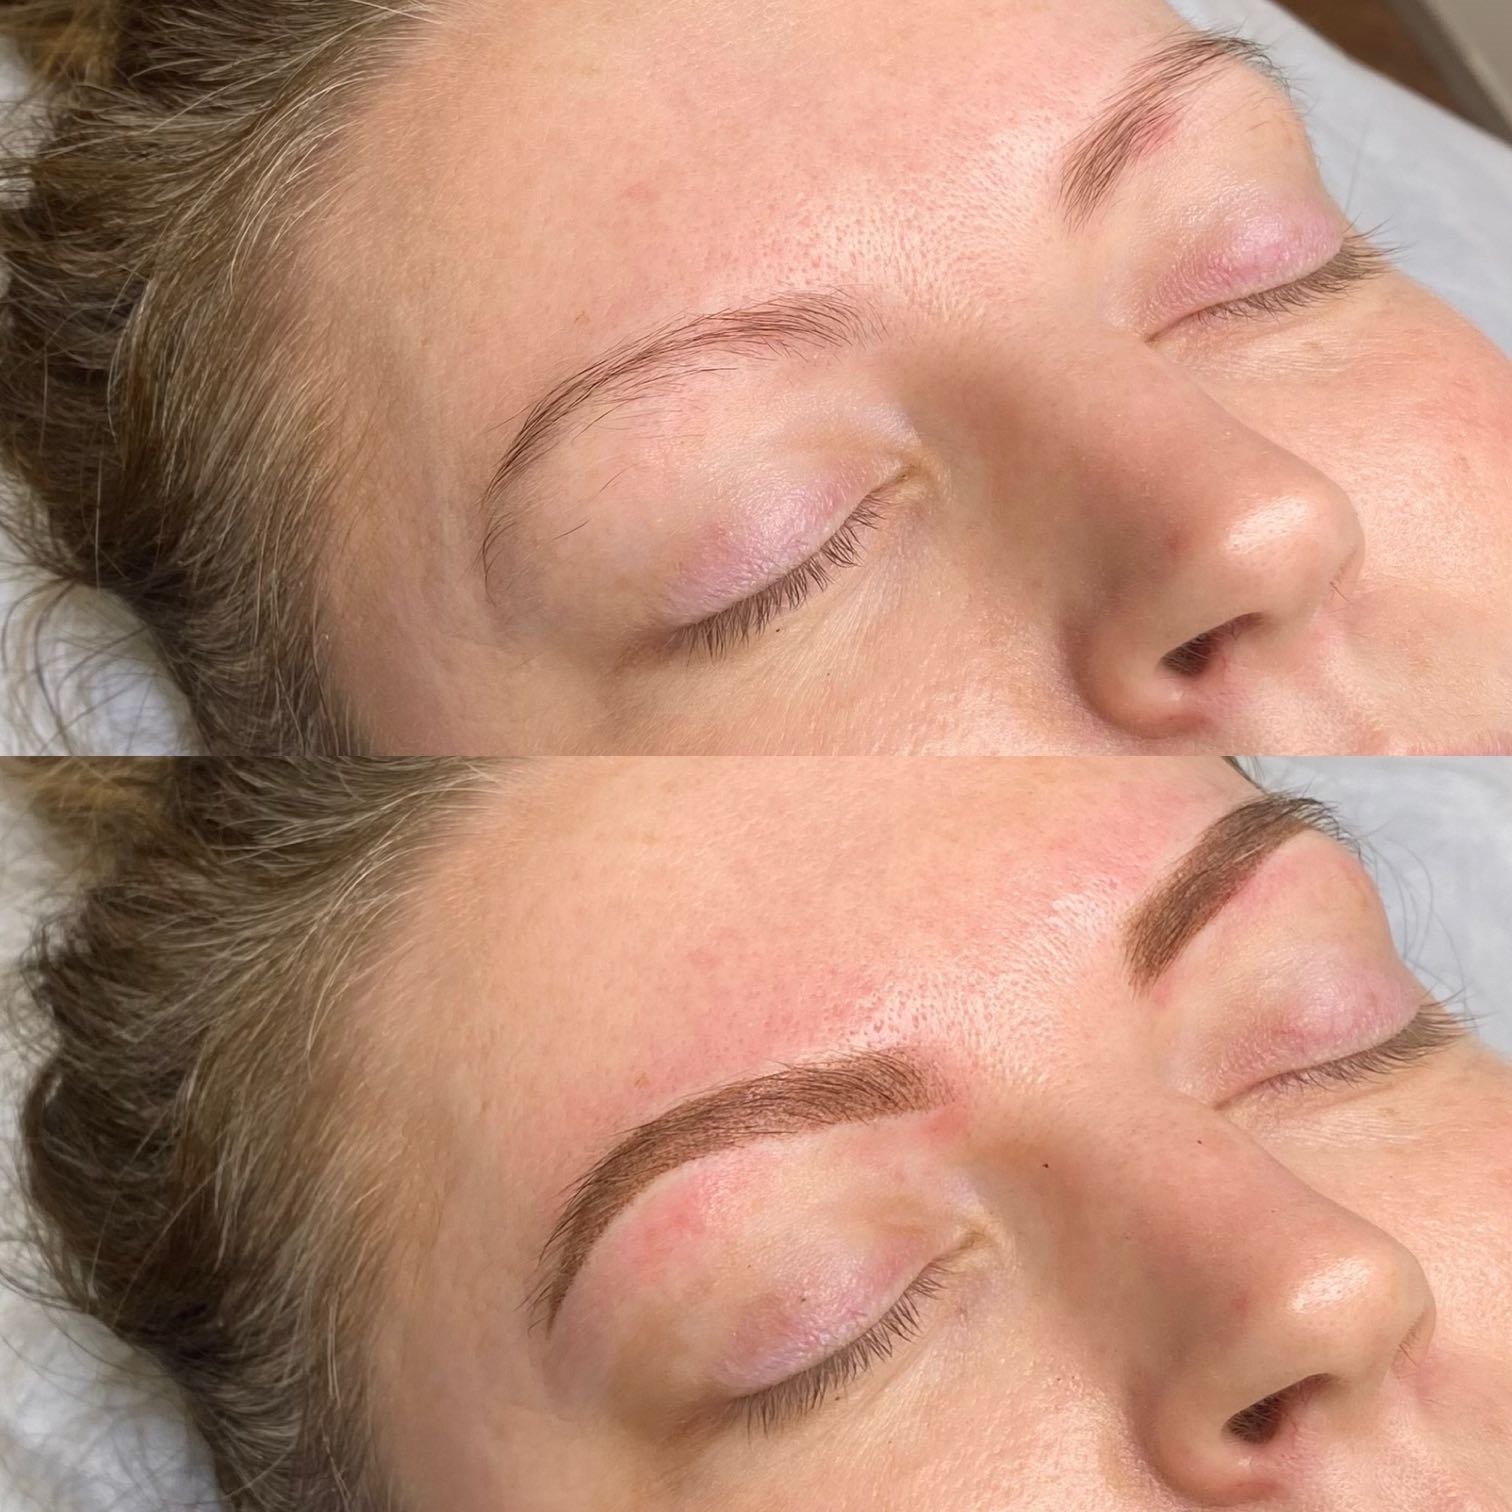 Why choose powder brows?

Powder brows achieve a soft, filled-in brow look, similar to the appearance of makeup powder, which can be particularly beneficial for those with sparse or thin eyebrows or for those looking for a more defined shape.

Book i